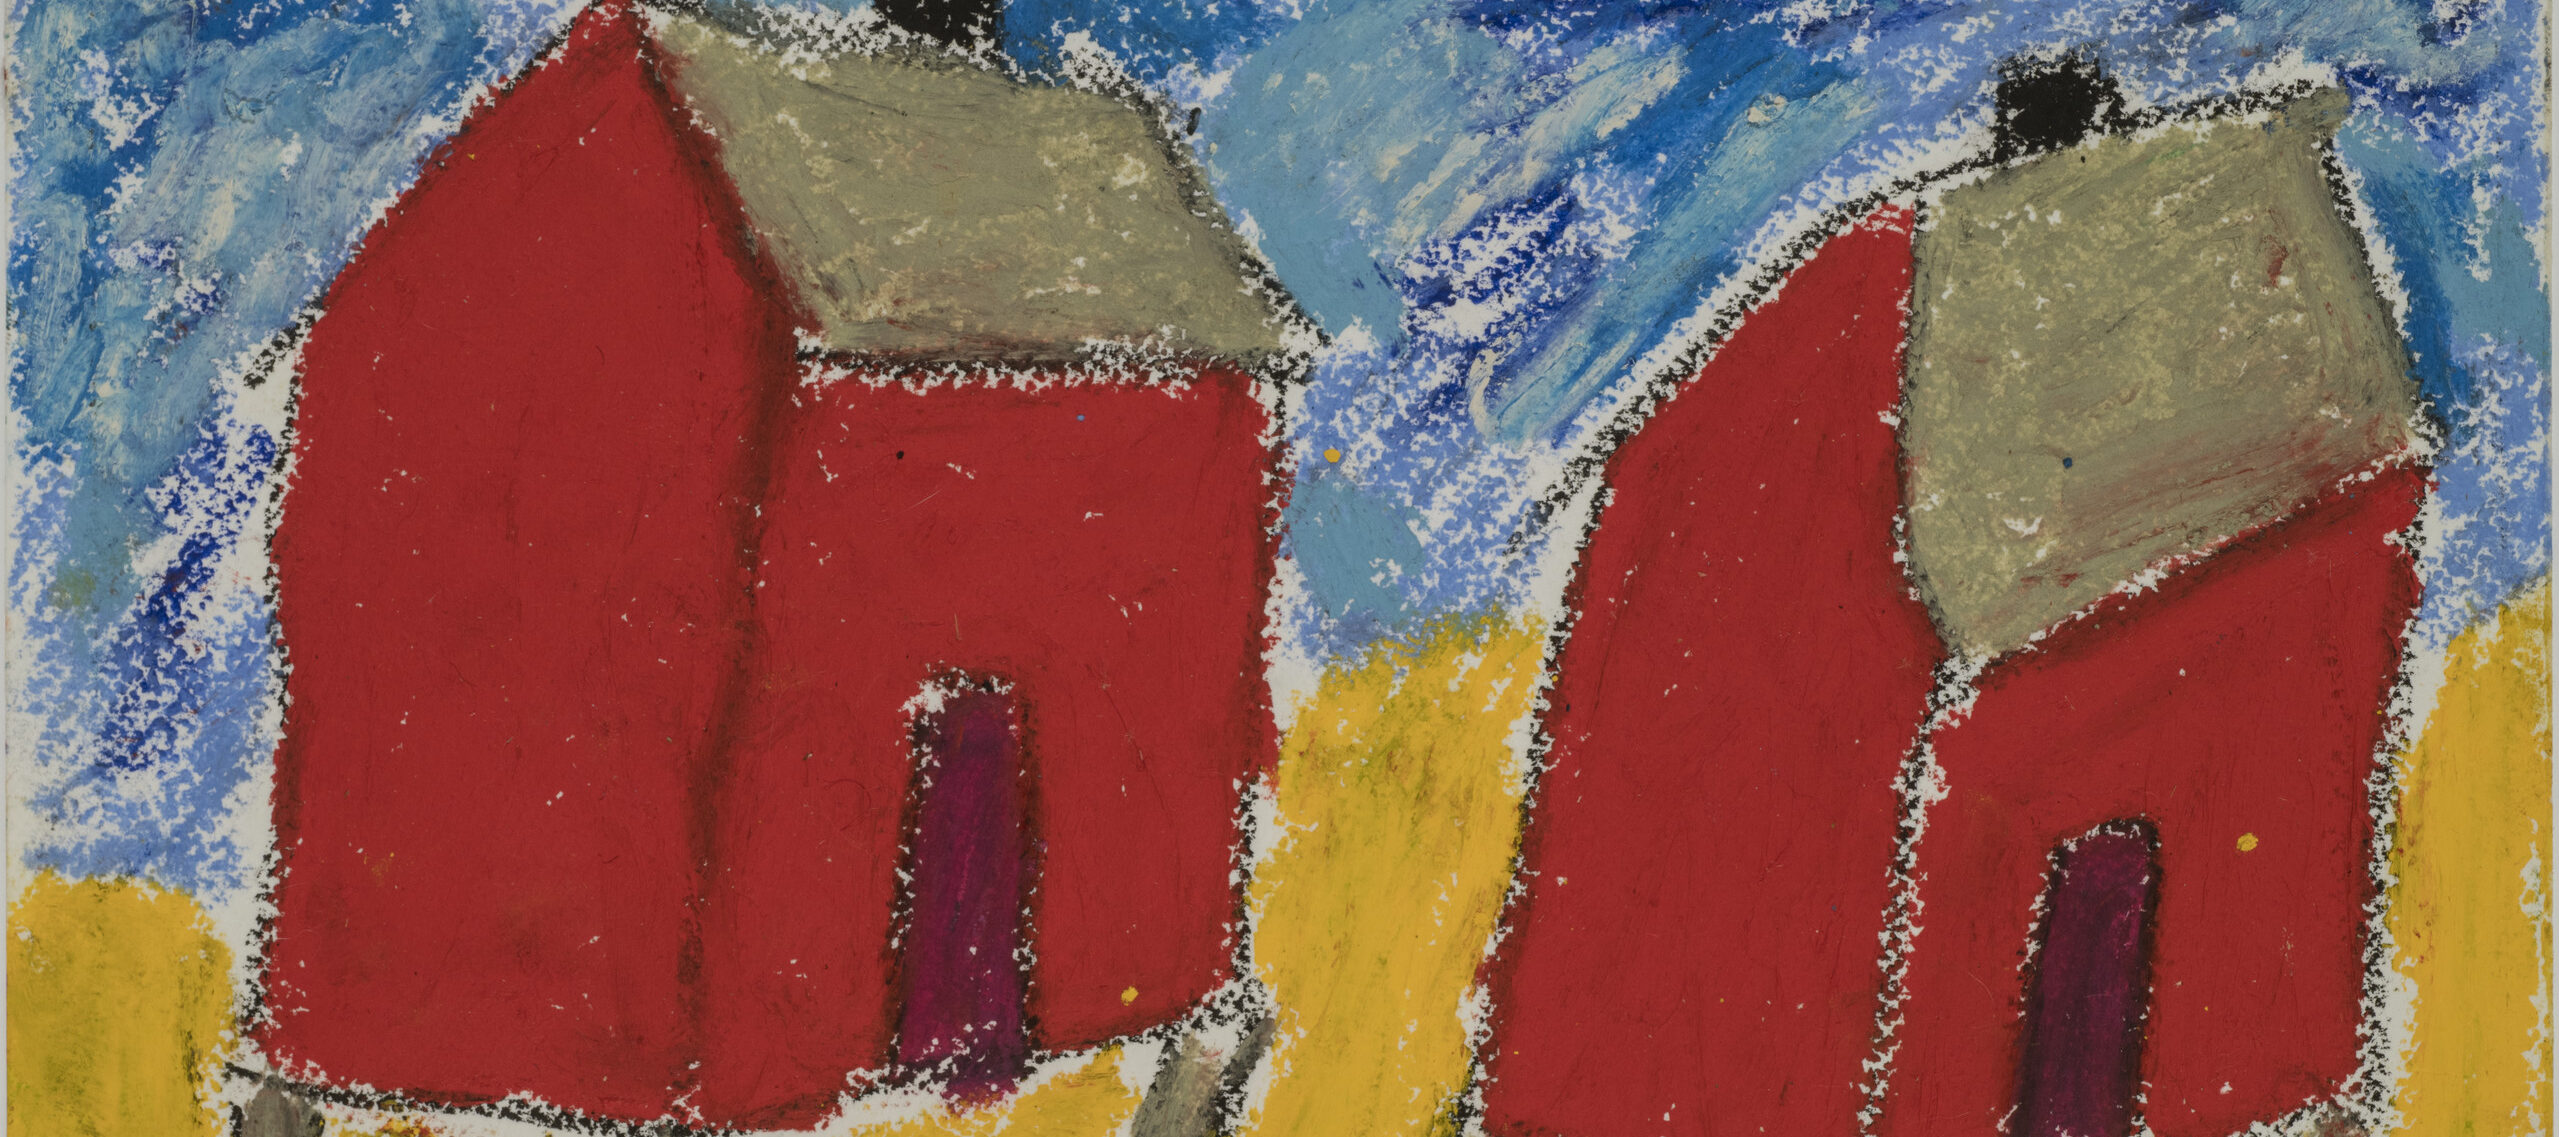 A colorful oil pastel work rendered in a basic, child-like style, depicting two square, red shacks with gray roofs and short, gray stilt bottoms sit atop a yellow ground and against a sky blue background.